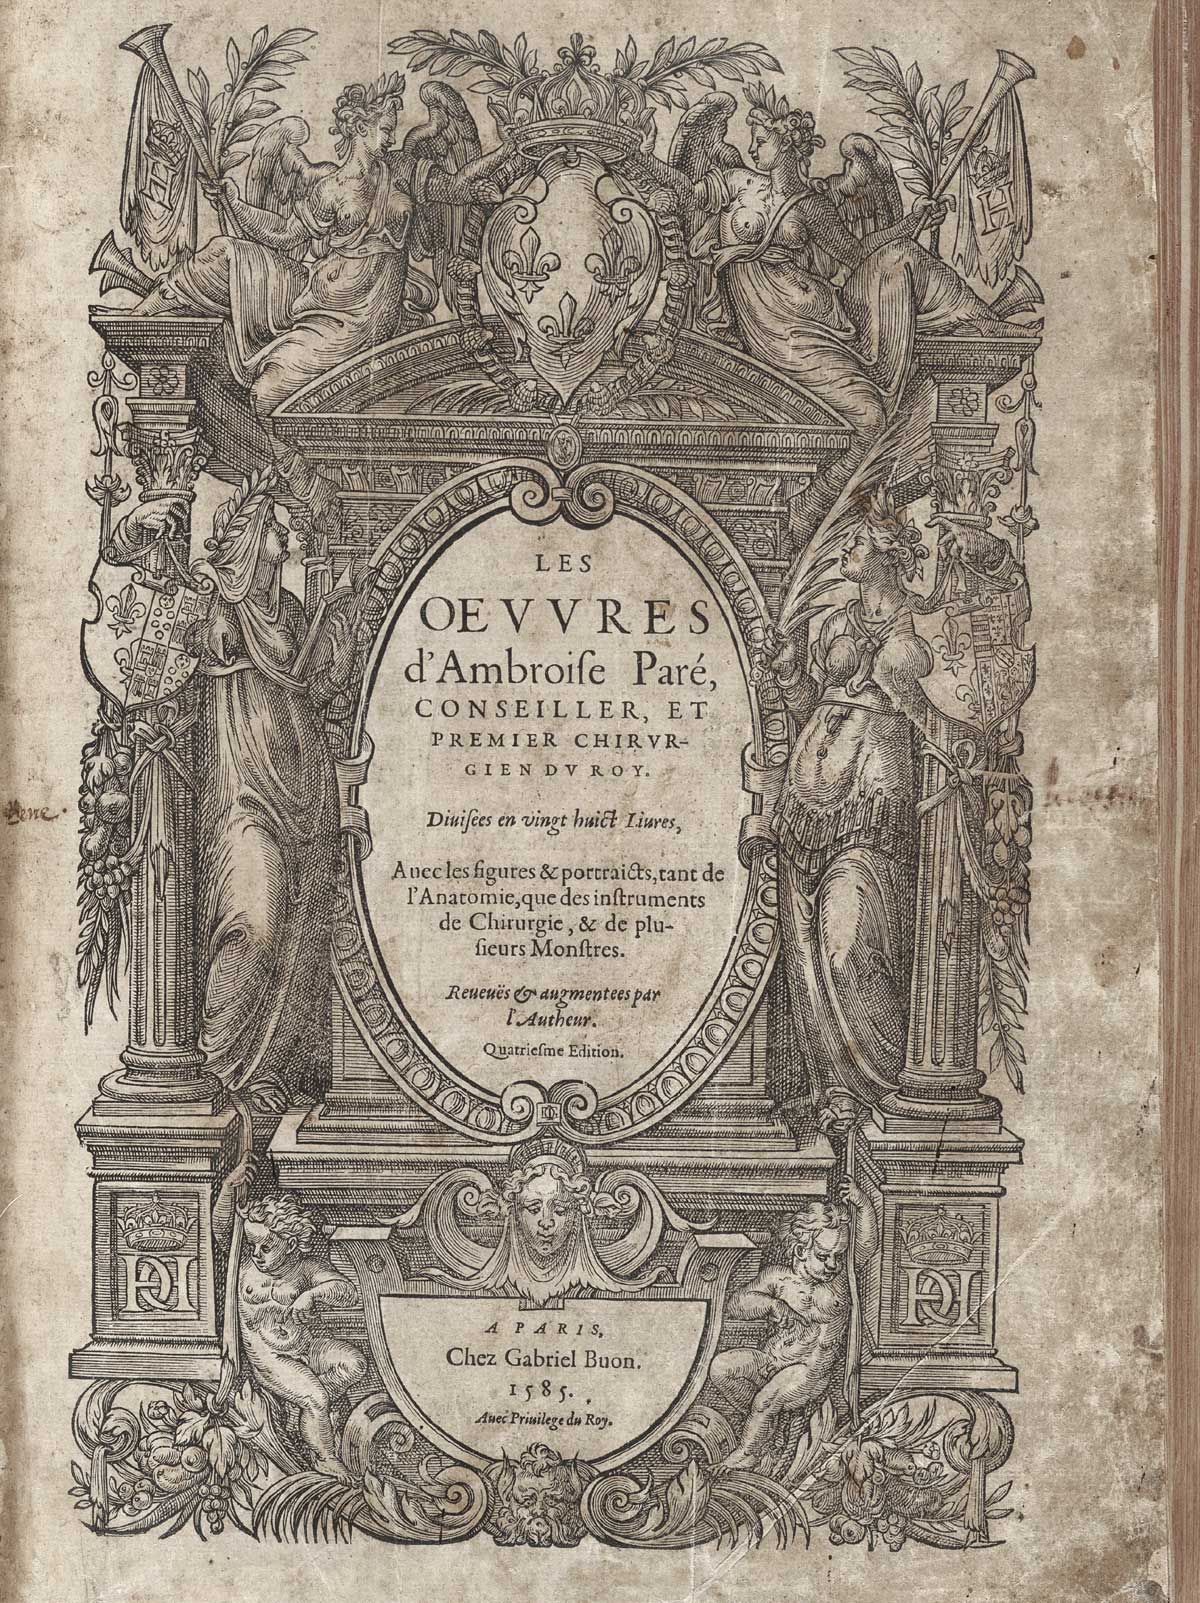 Typeset title page of Ambroise Paré’s Oeuvres, with large ornamental woodcut border.